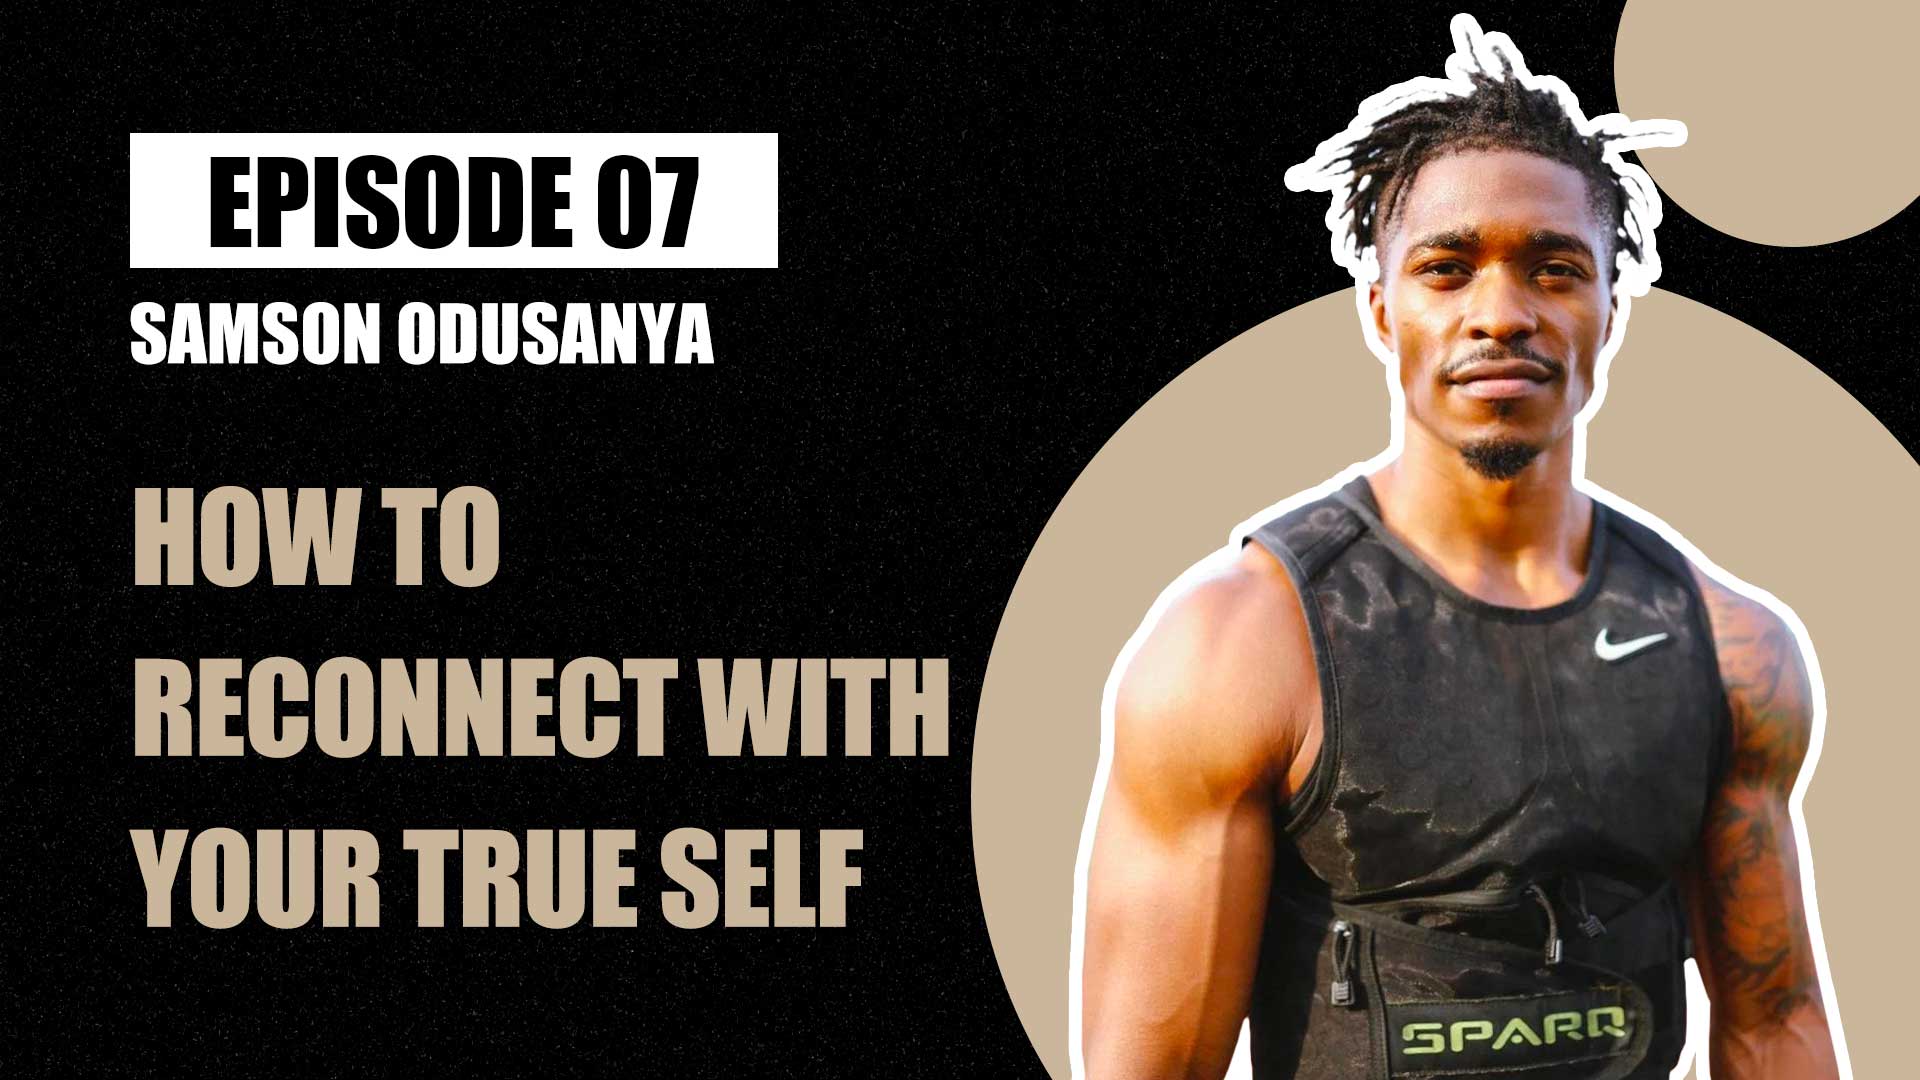 Samson Odusanya — Reconnection & living a meaningful life